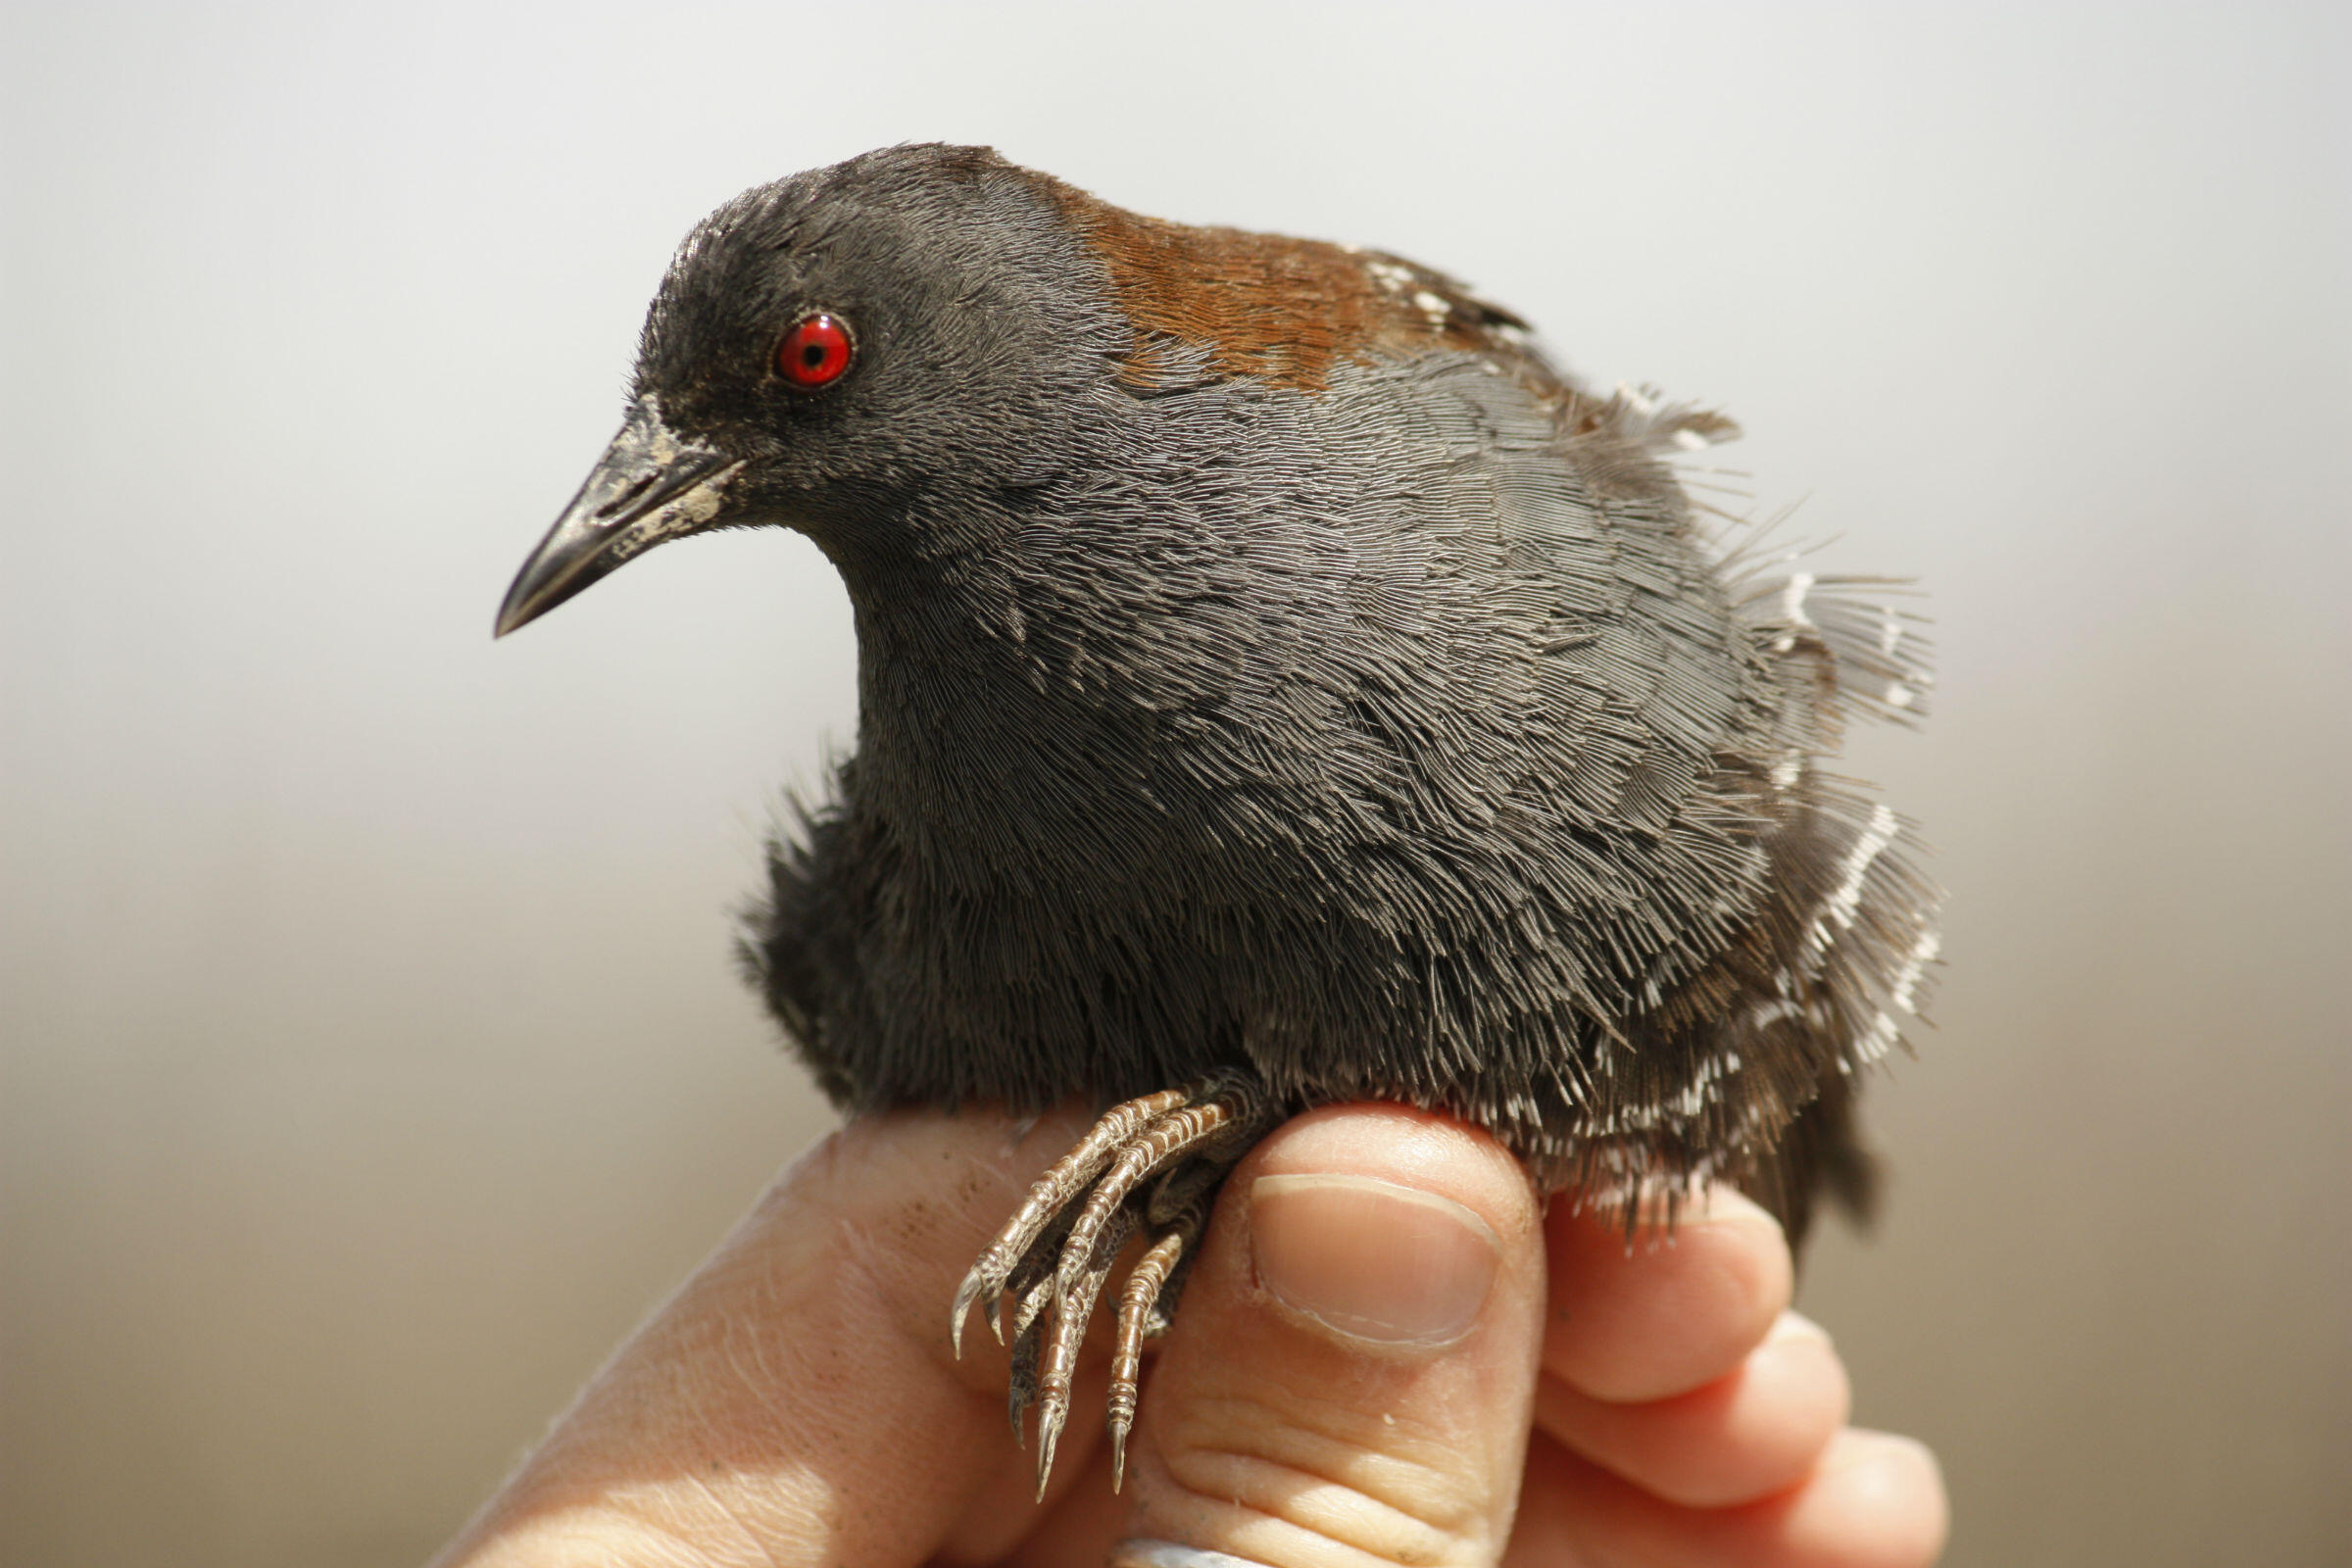 A black rail sits in someone's hand. The grey, white, and brown feathers are seen in great detail.